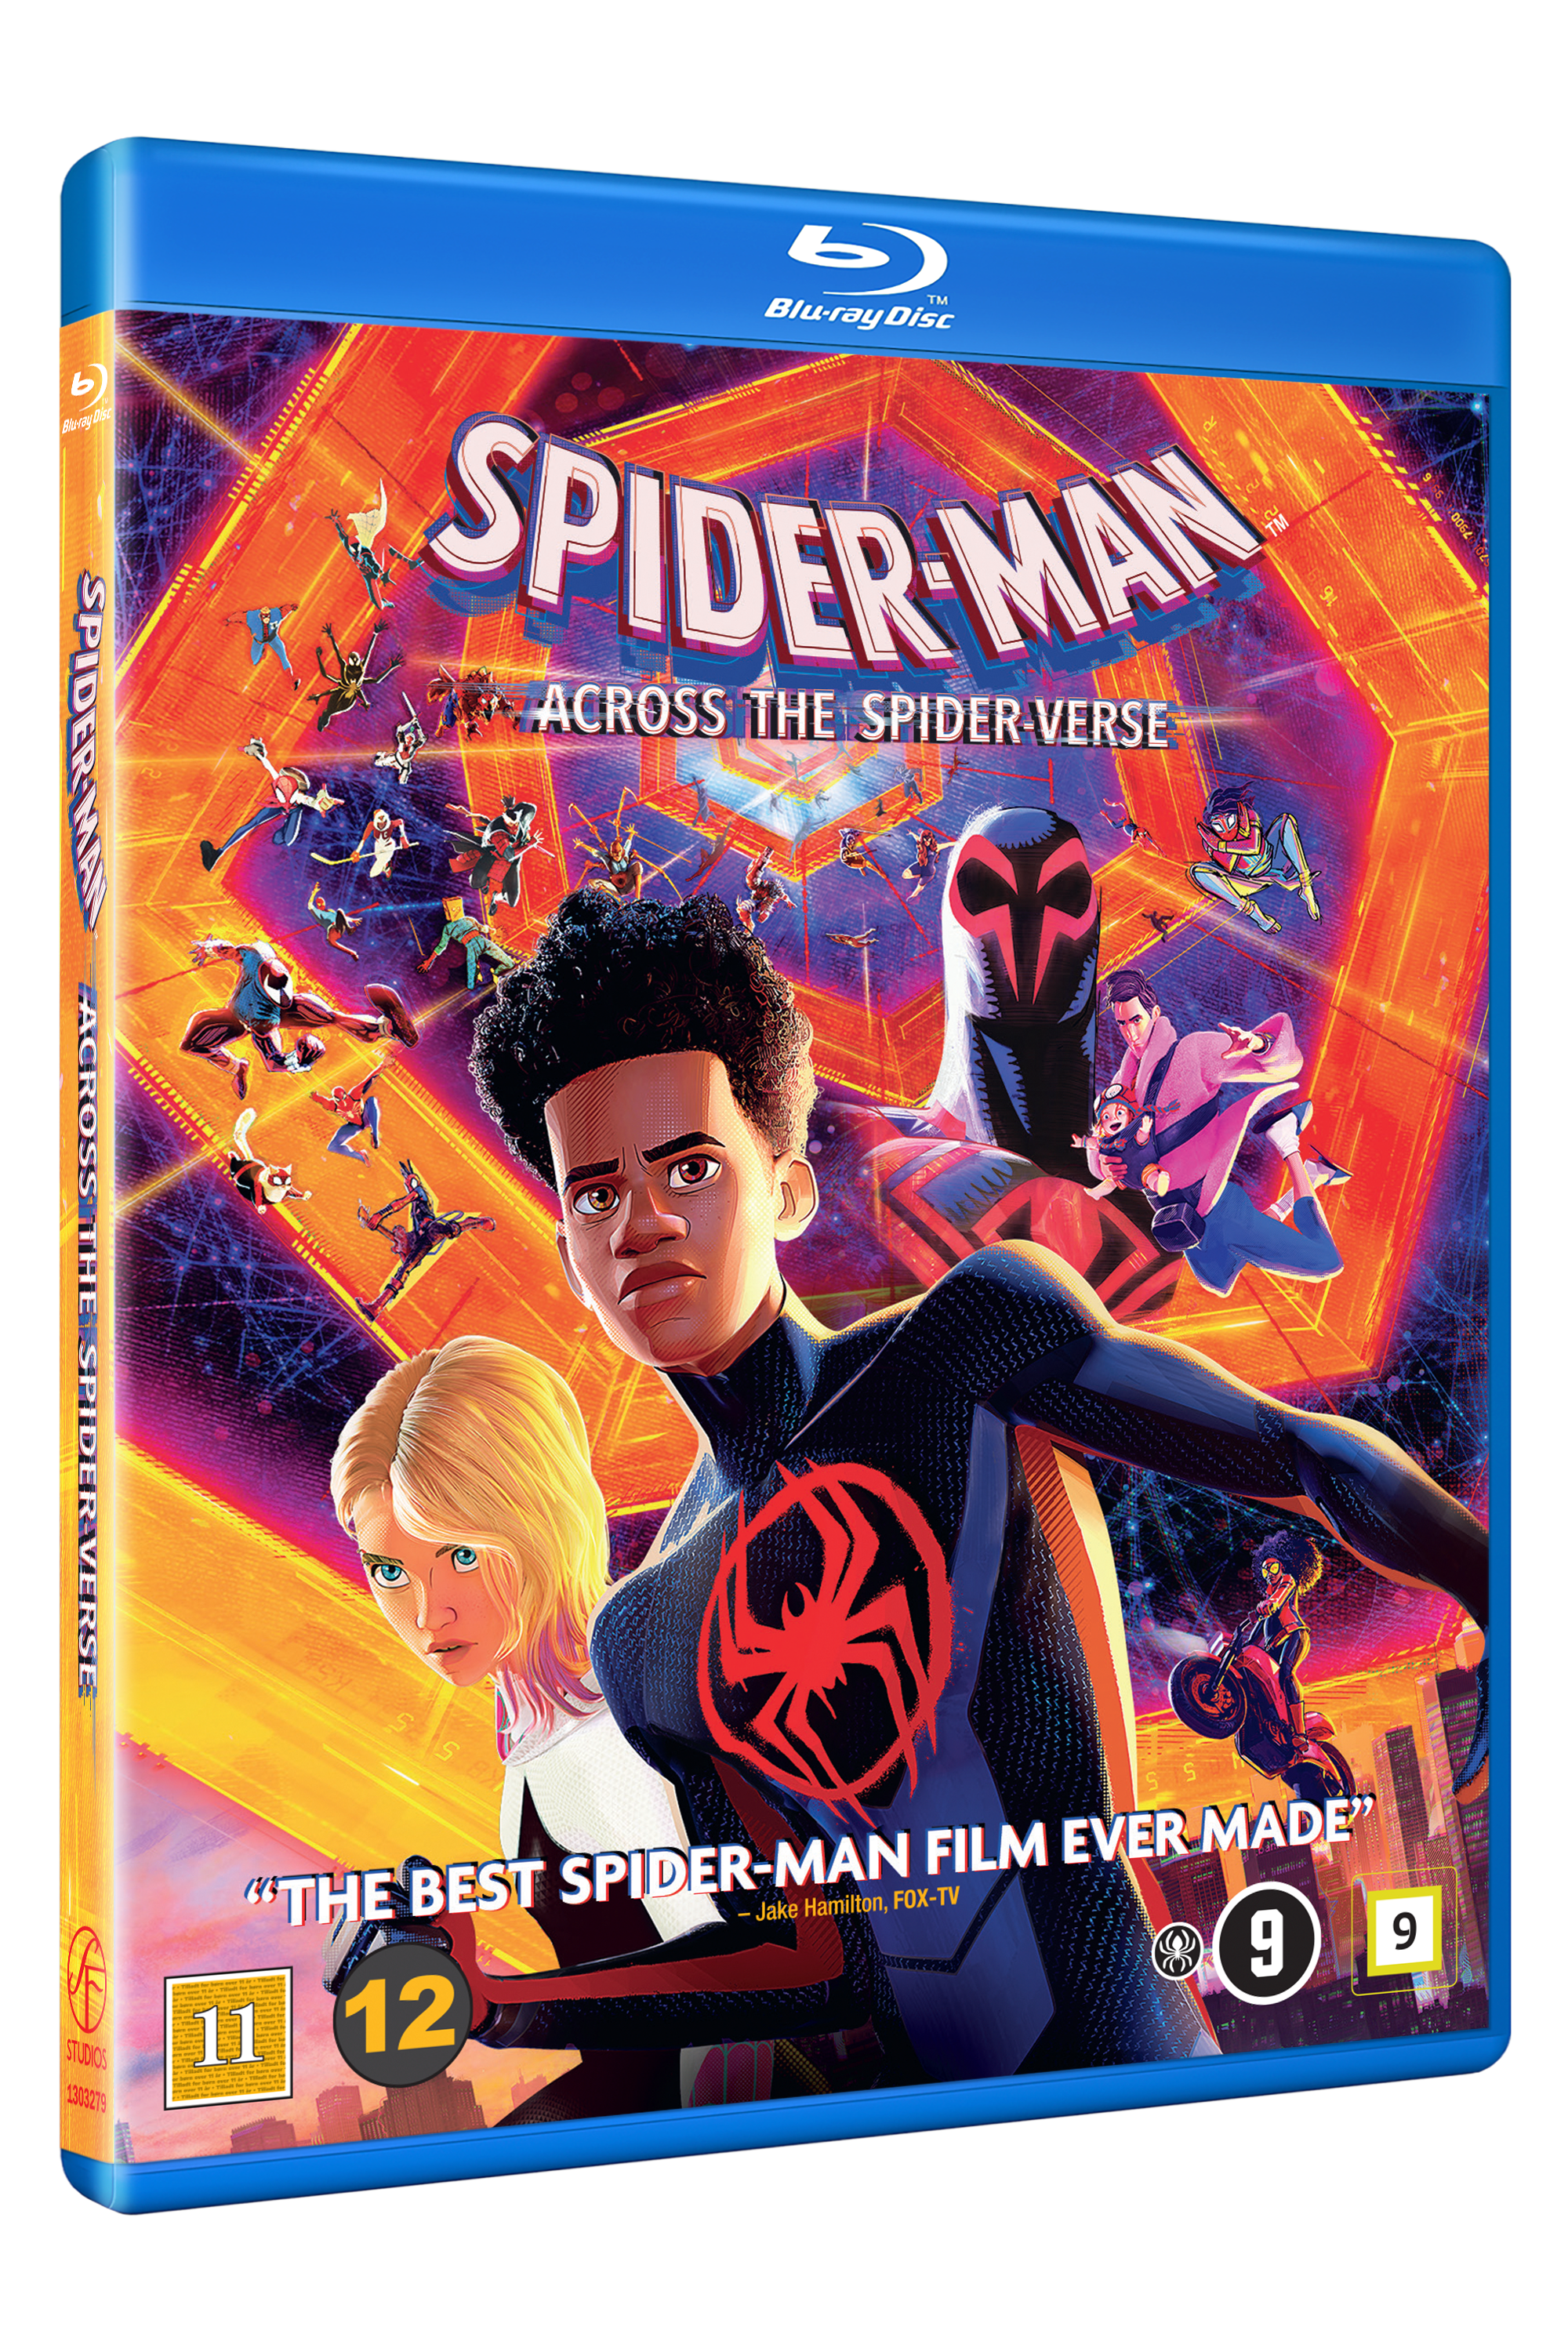 https://scale.coolshop-cdn.com/product-media.coolshop-cdn.com/23G6WR/57d6a239431149d7961d32b0b27b03a9.png/f/spider-man-across-spider-verse.png